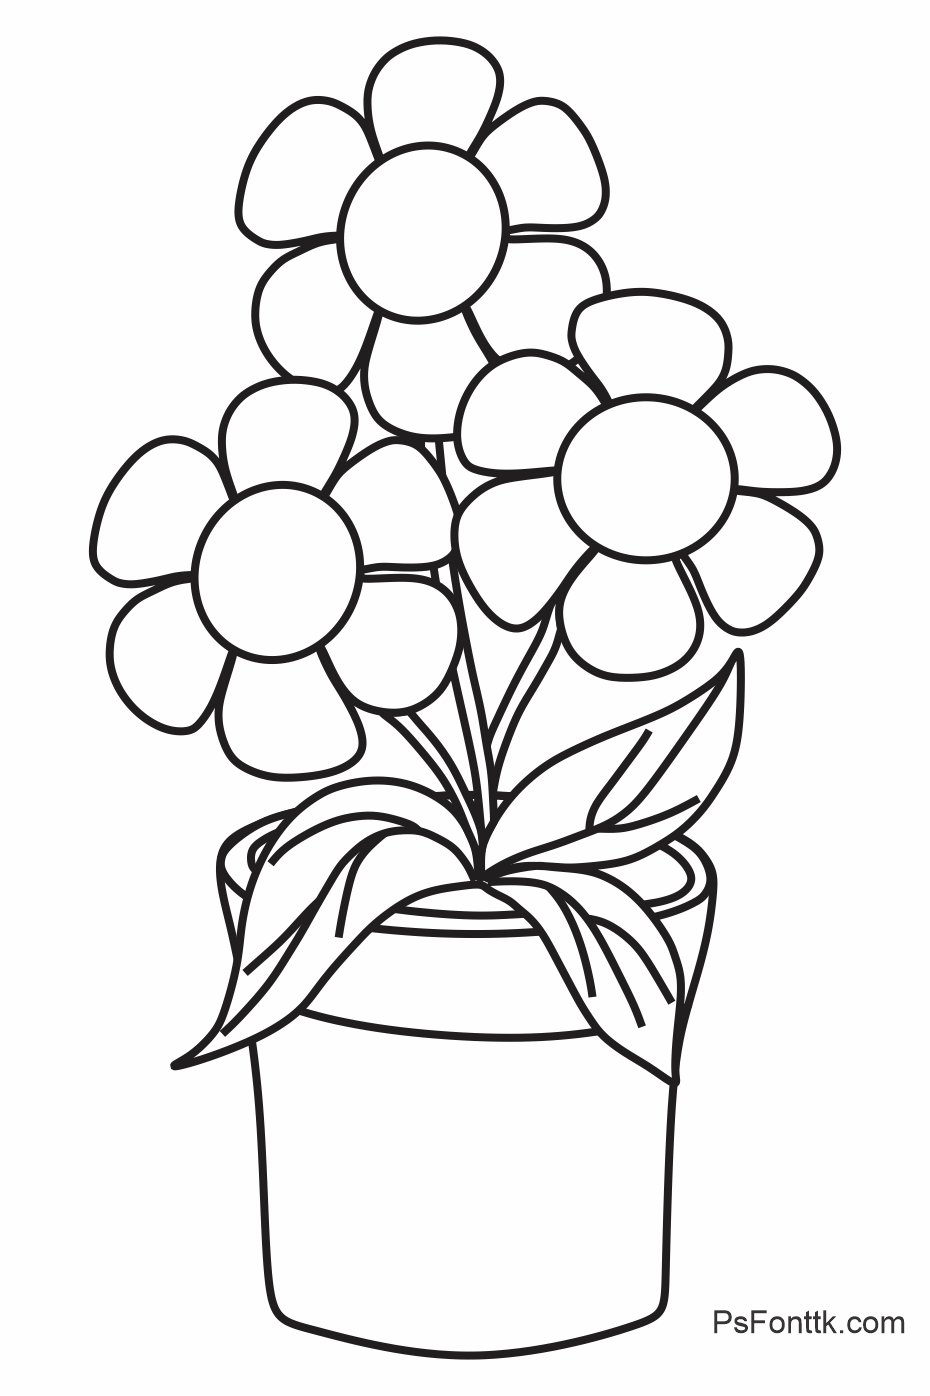 Flower Printable Coloring Pages - Psfont tk